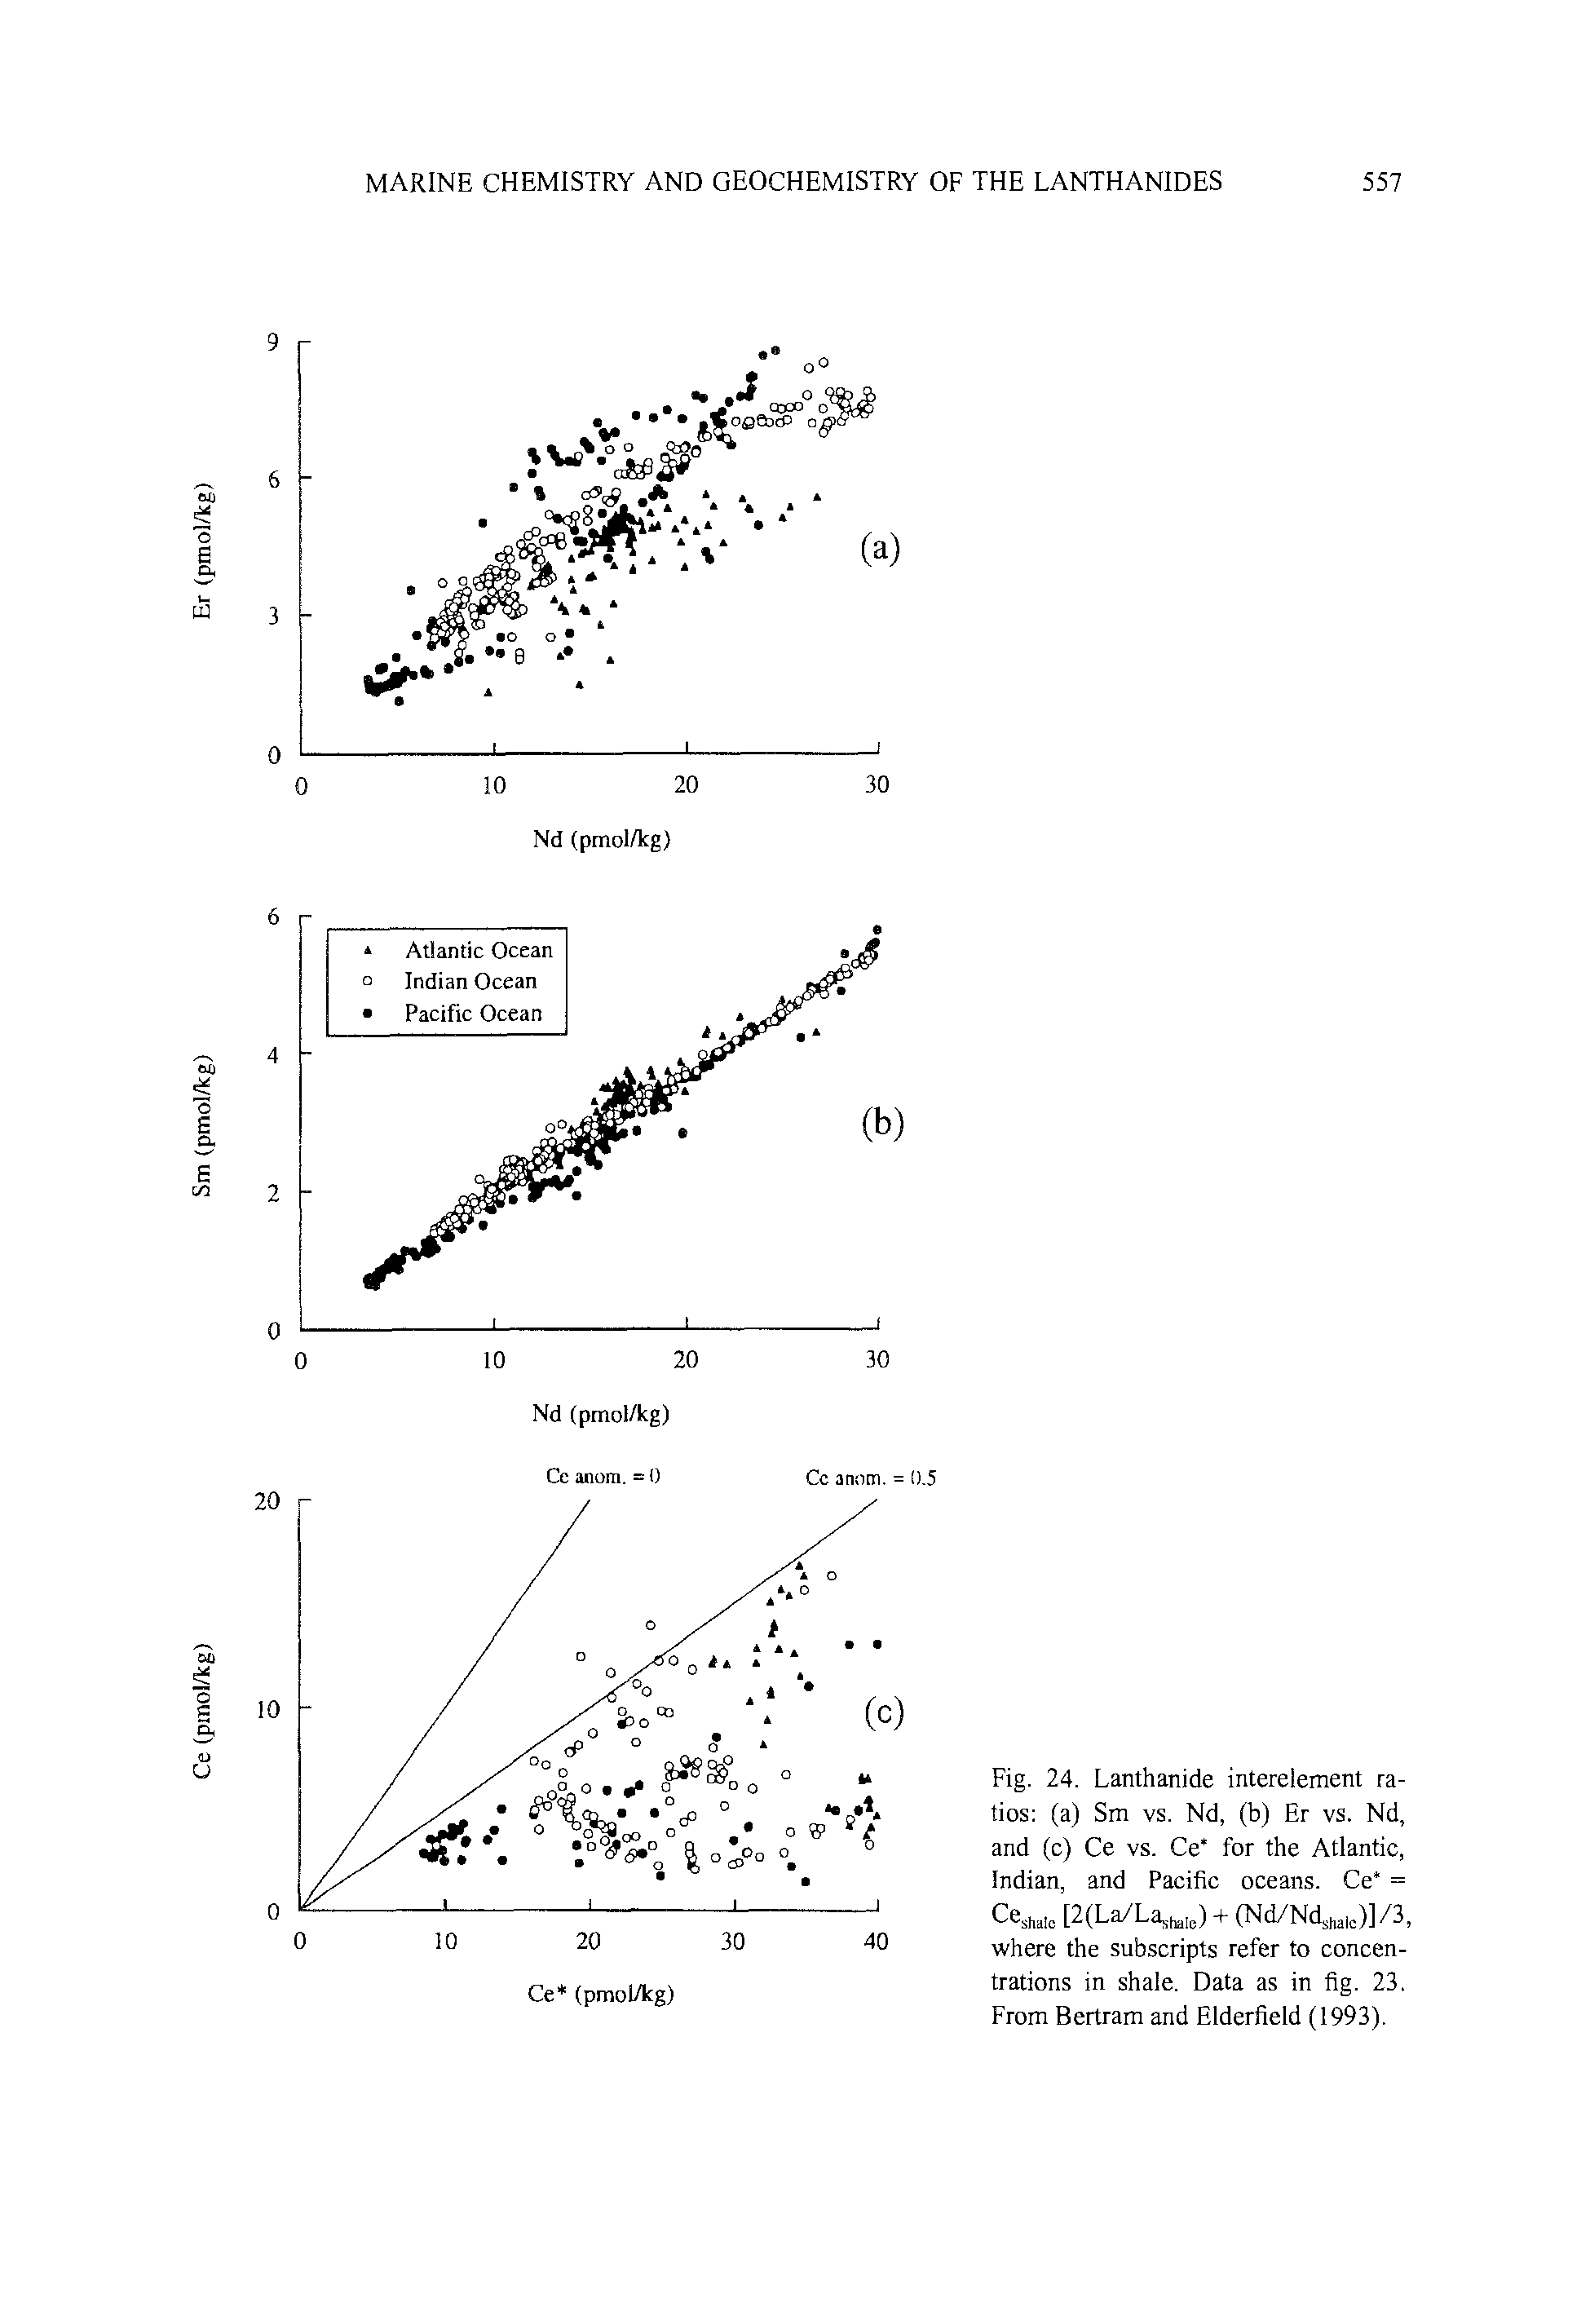 Fig. 24. Lanthanide interelement ratios (a) Sm vs. Nd, (b) Er vs. Nd, and (c) Ce vs. Ce for the Atlantic, Indian, and Pacific oceans. Ce = [2(La/La tate) + (Nd/Nd,teie)]/3, where the subscripts refer to concentrations in shale. Data as in fig. 23. From Bertram and Elderfield (1993).